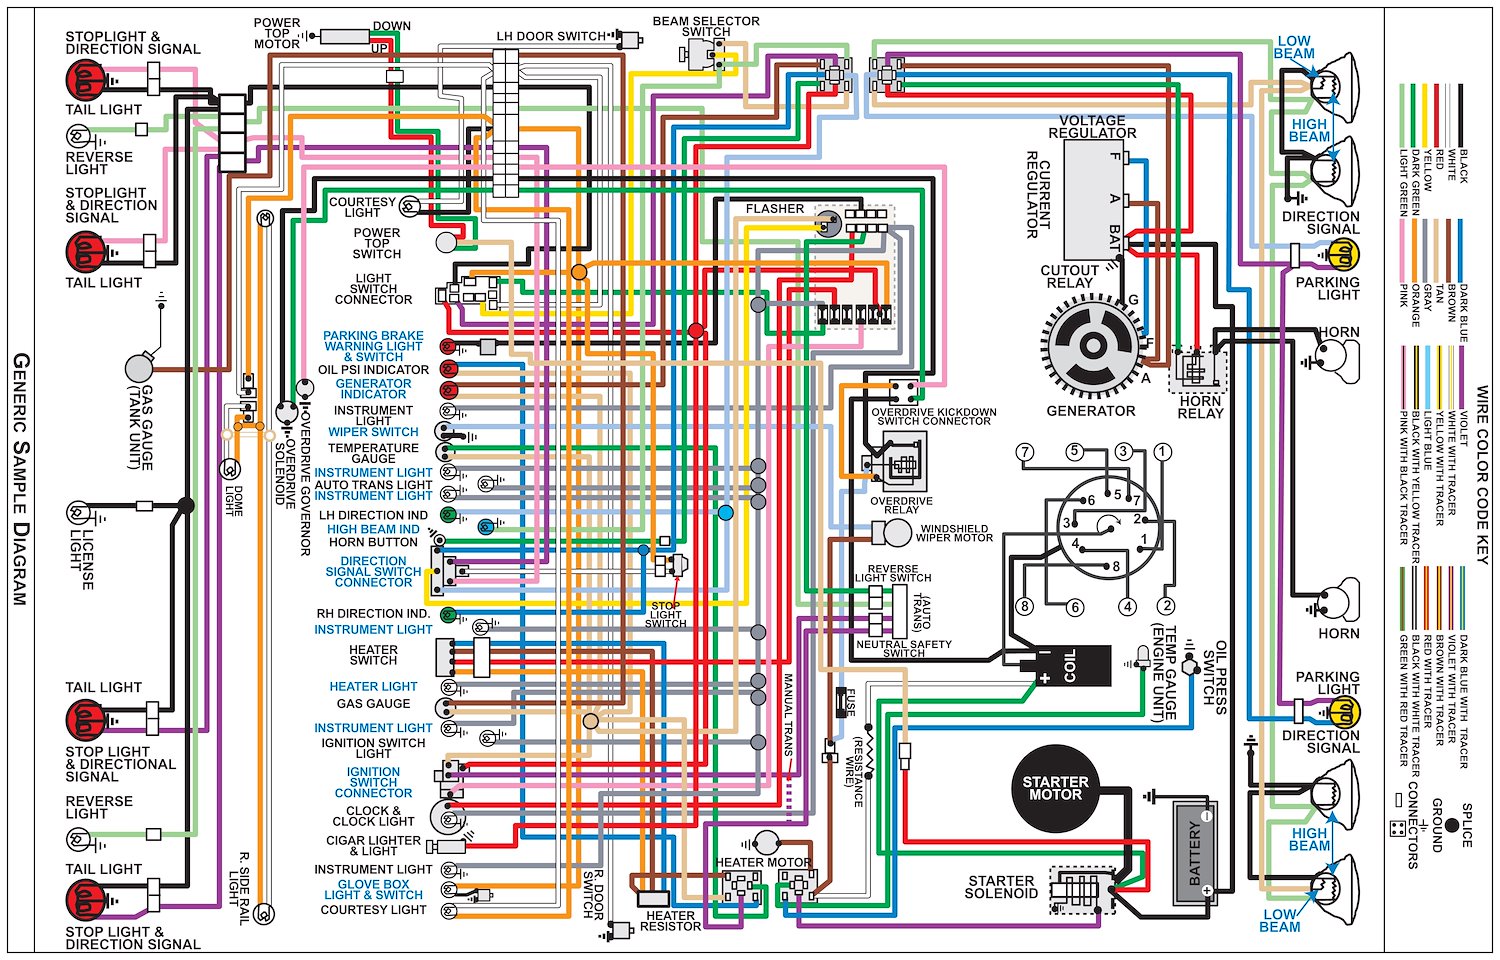 Wiring Diagram for 1962 Ford Fairlane, 11 in x 17 in., Laminated